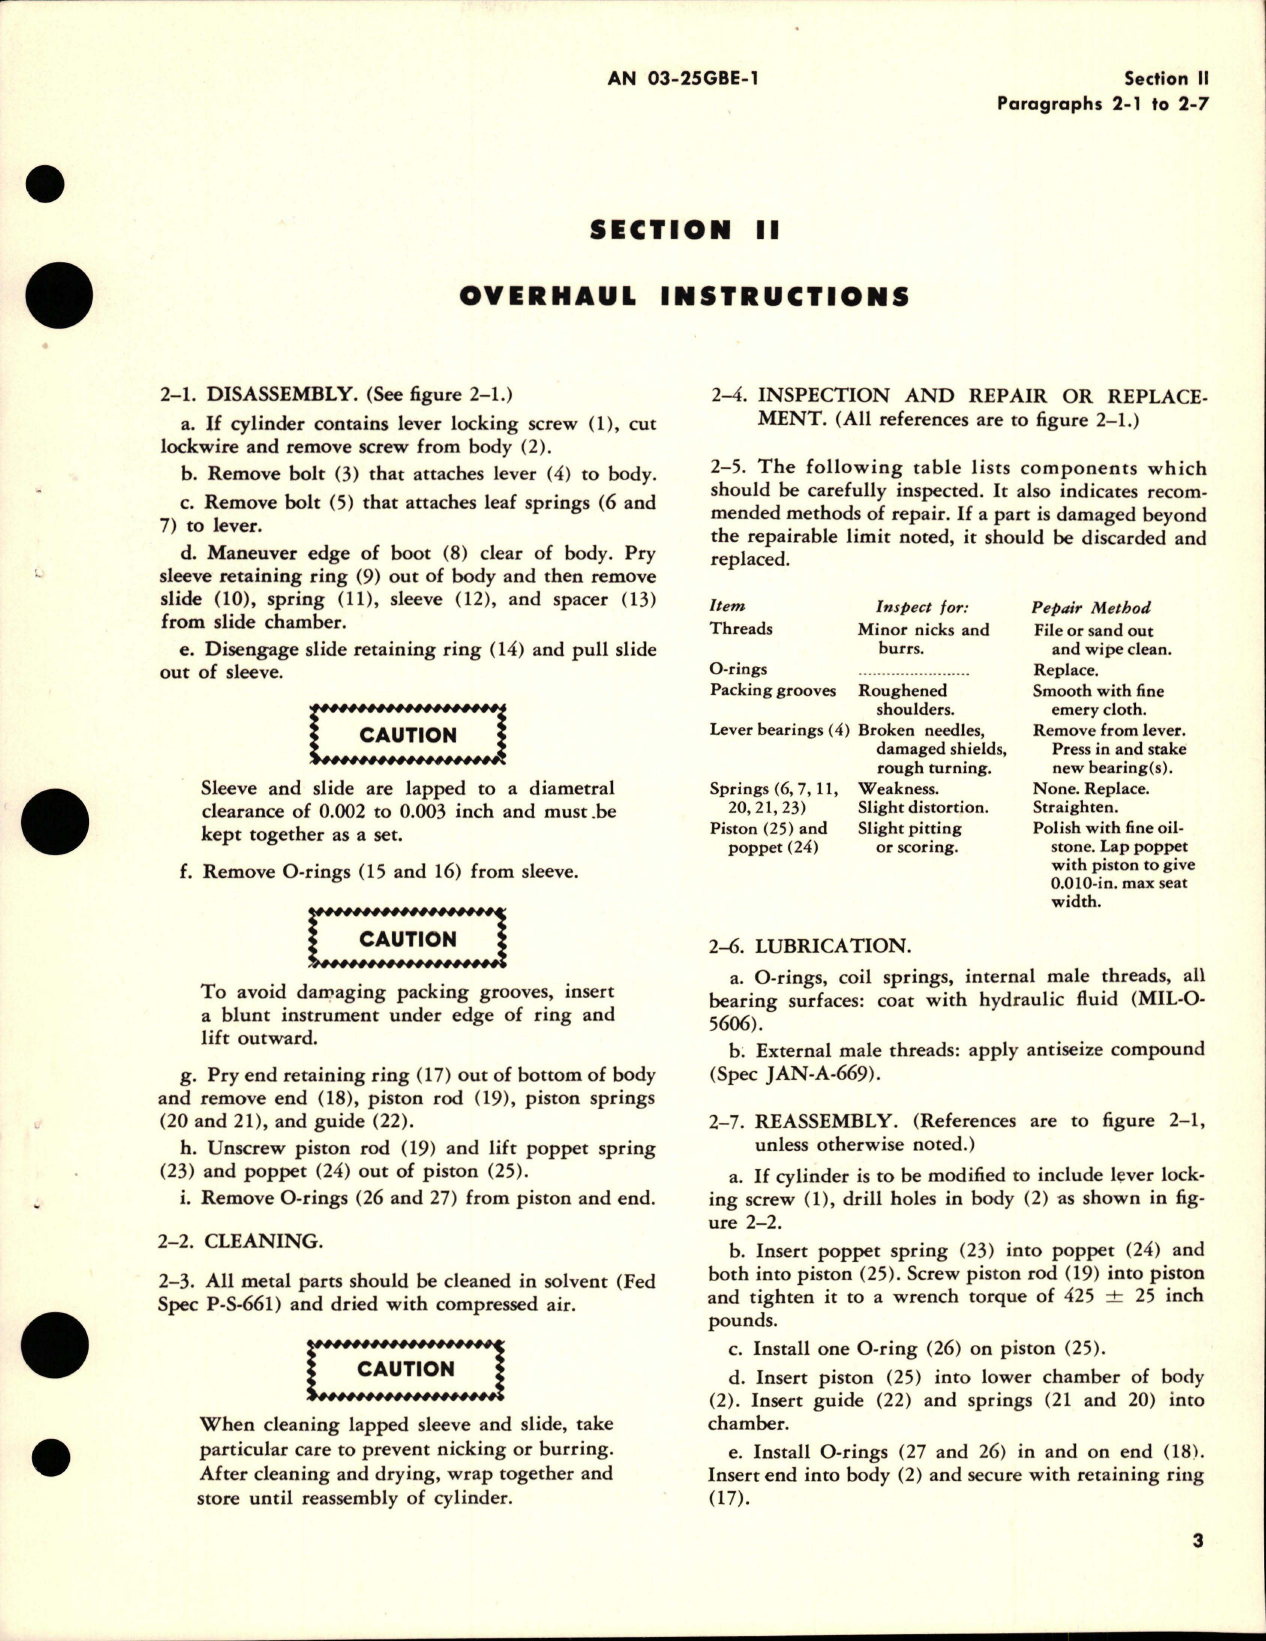 Sample page 5 from AirCorps Library document: Overhaul Instructions for Brake Power Boost Master Cylinders